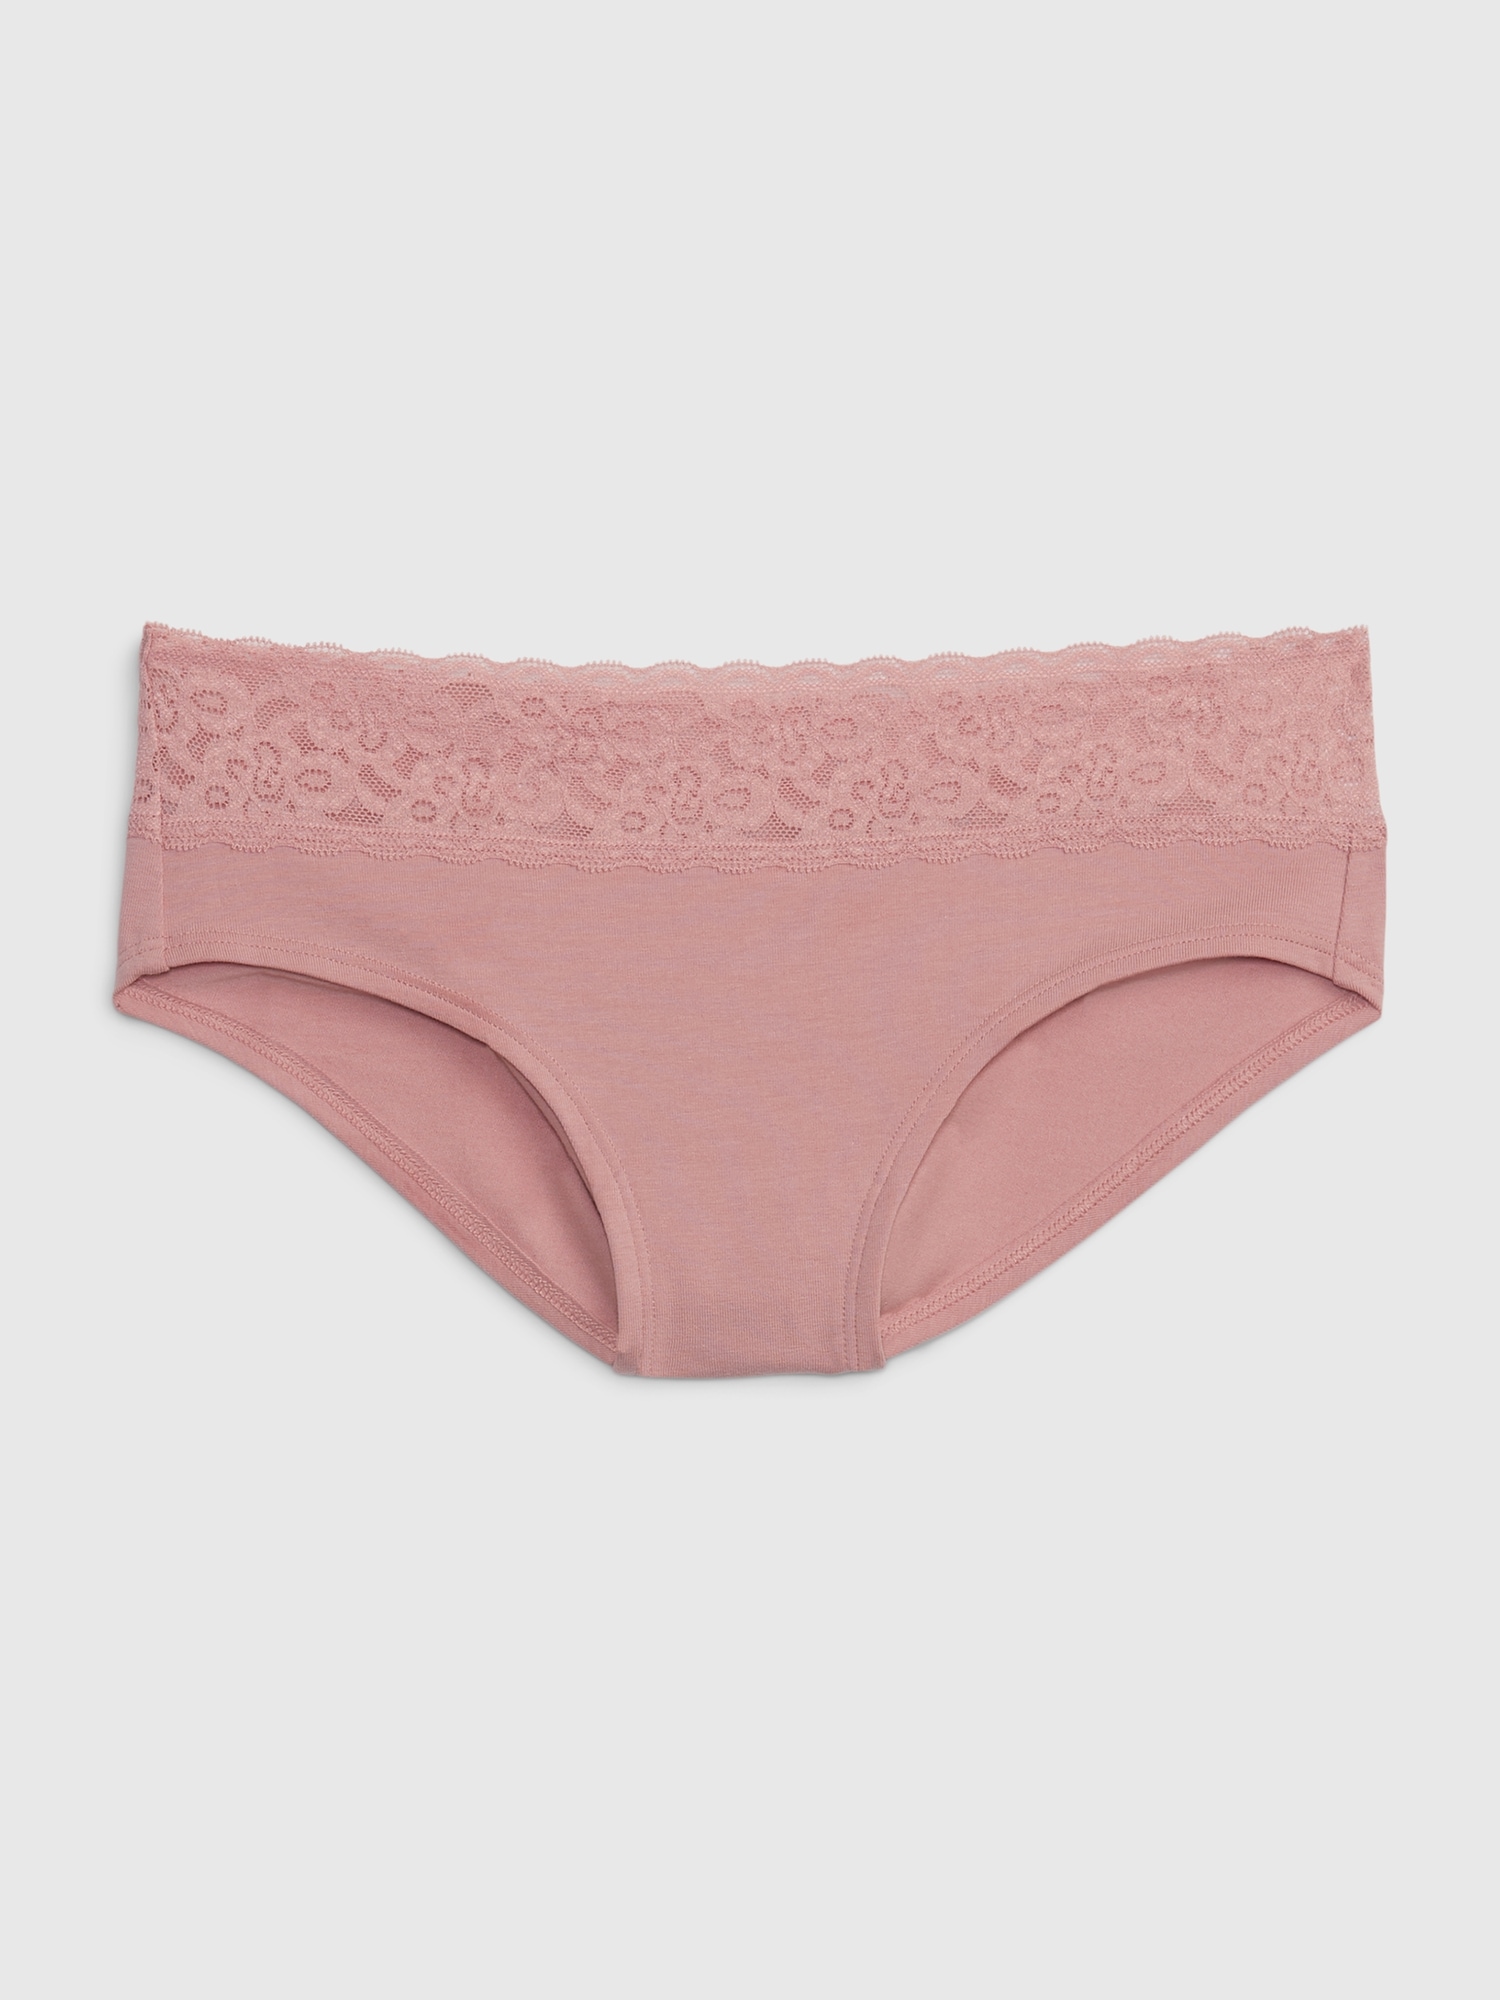 Gap Organic Stretch Cotton Lace Hipster pink. 1